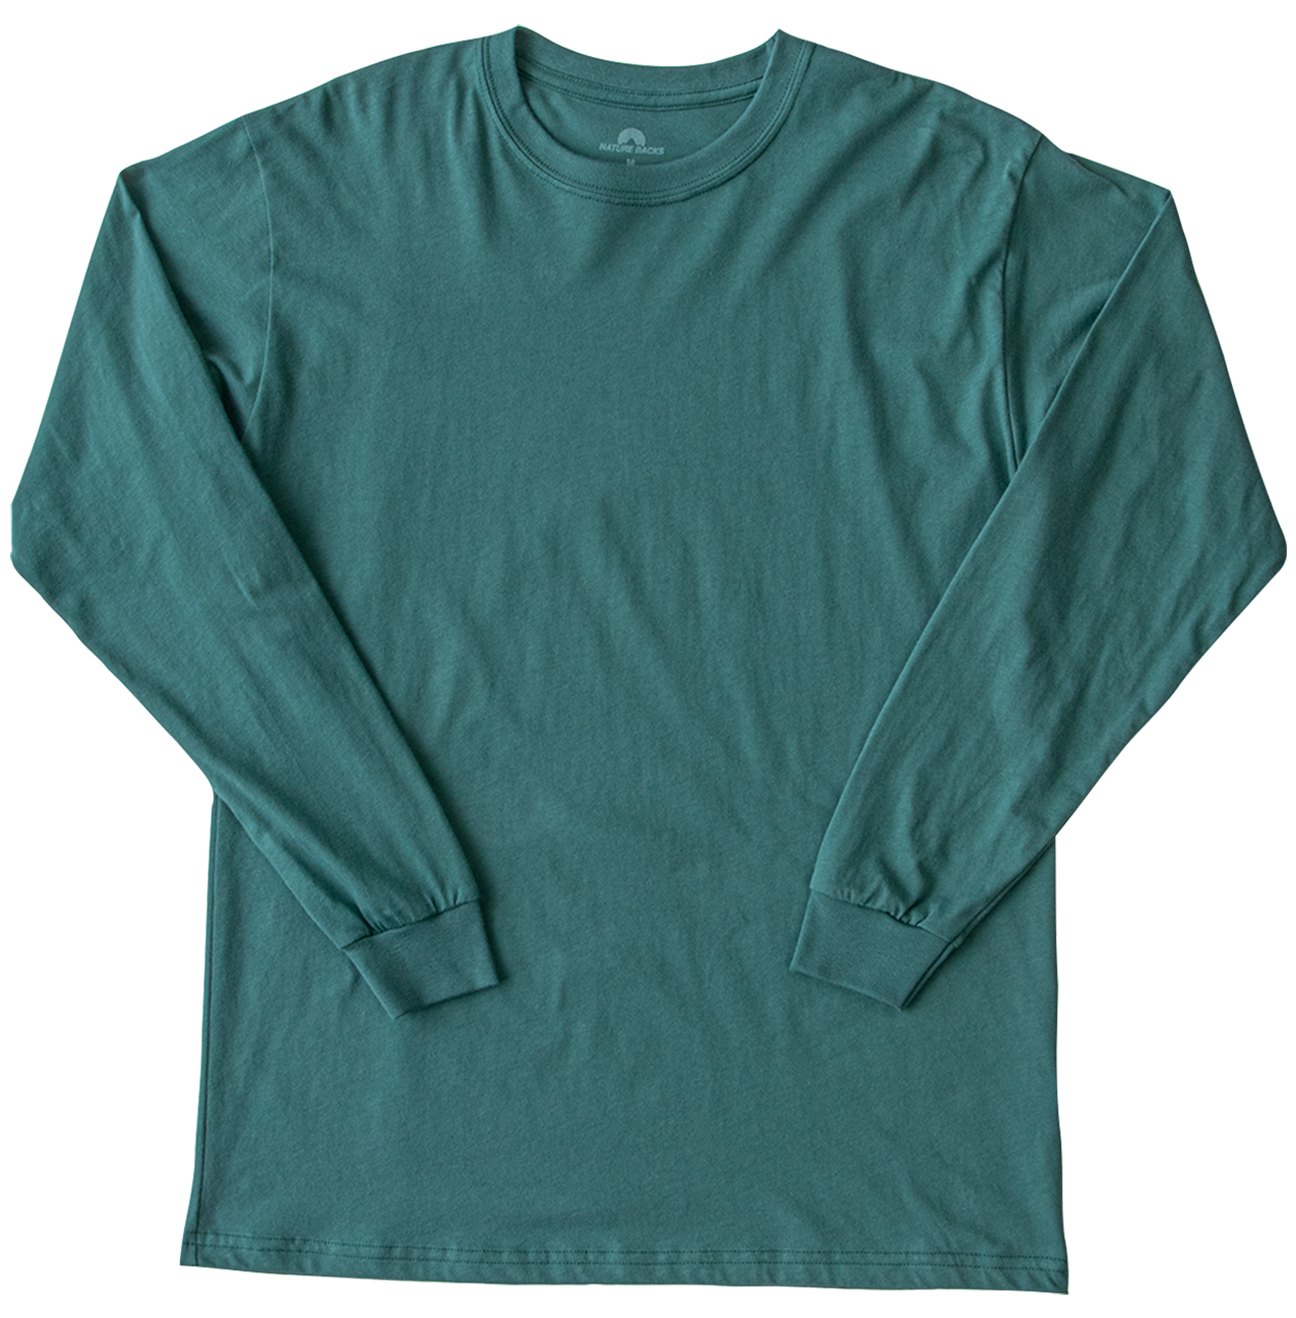 Nature Backs Long Sleeve 100% Organic Cotton T-Shirt | Minimalist Spruce Long Sleeve made with Eco-Friendly Fibers Sustainably made in the USA 